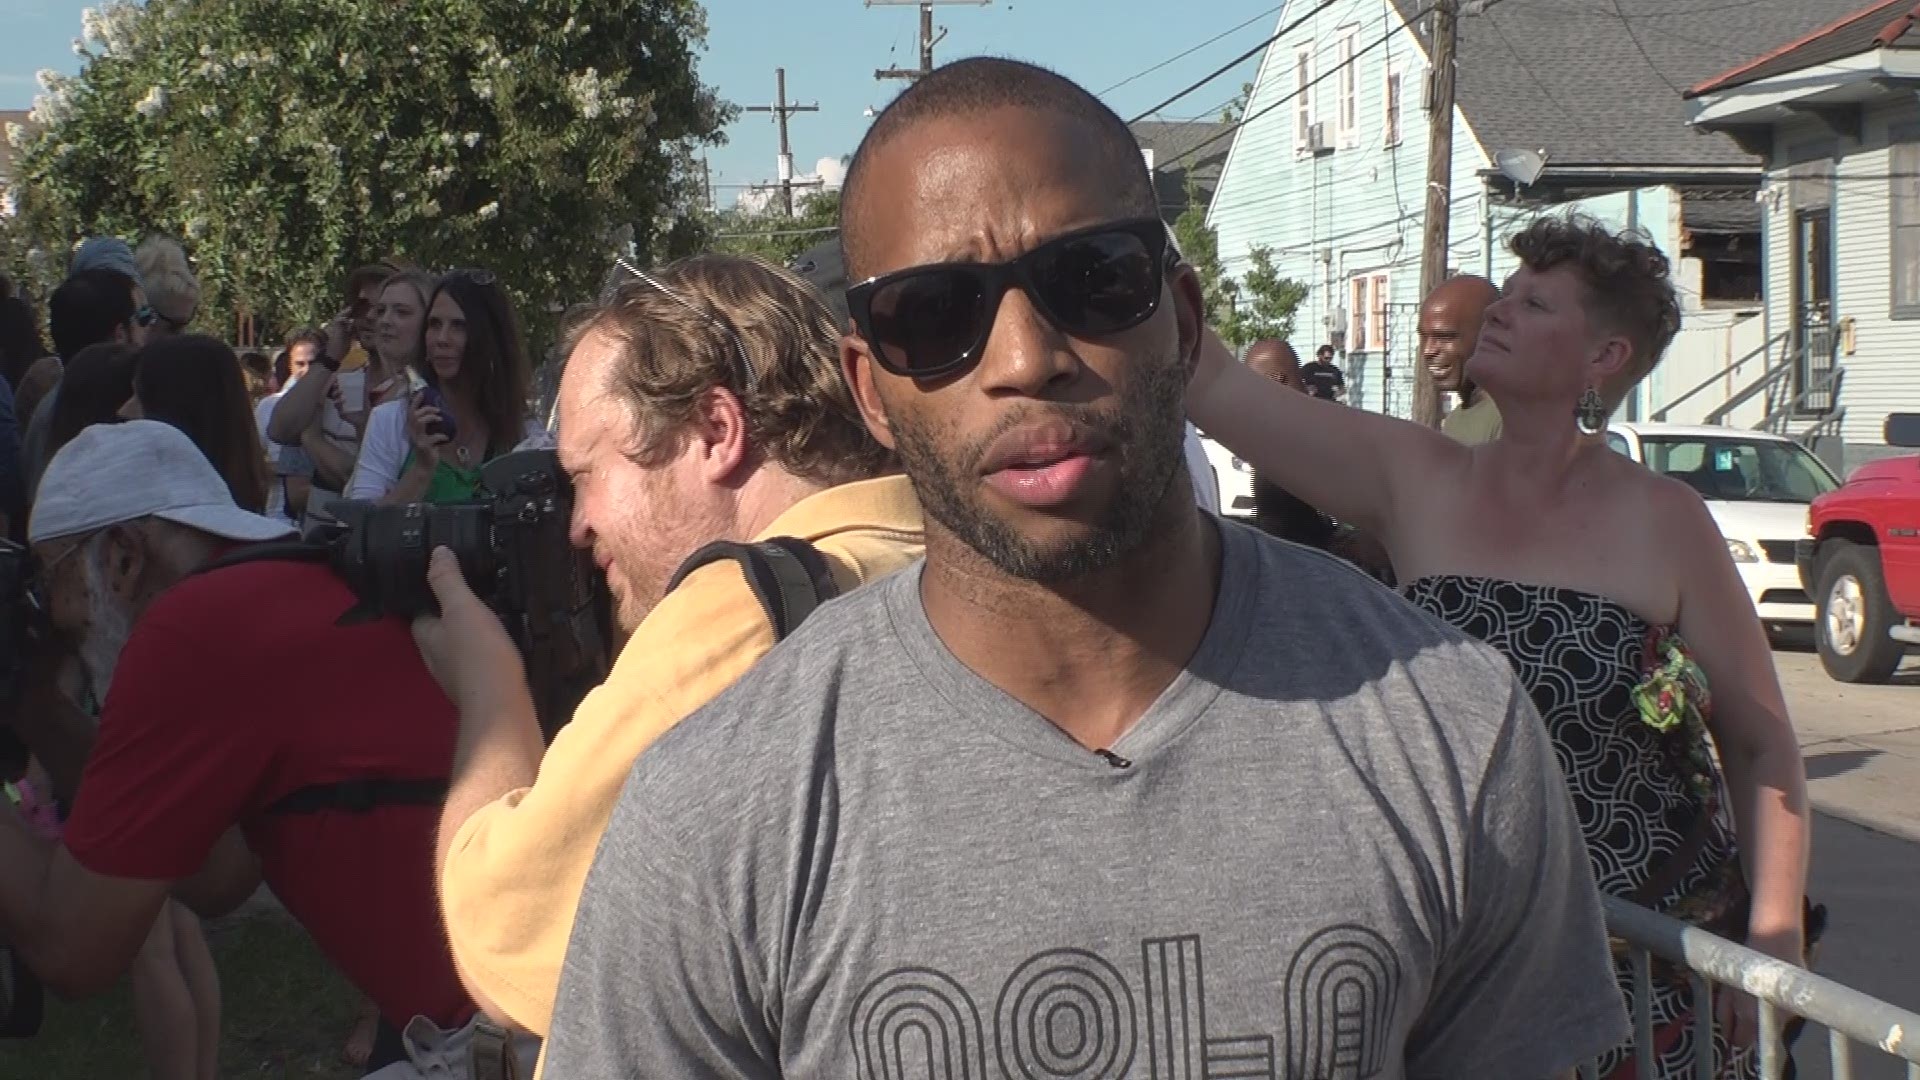 World-renown musician and New Orleans native Trombone Shorty talks the legacy and life of Art Neville at a second line through Treme to honor the late Neville on Monday, July 29.